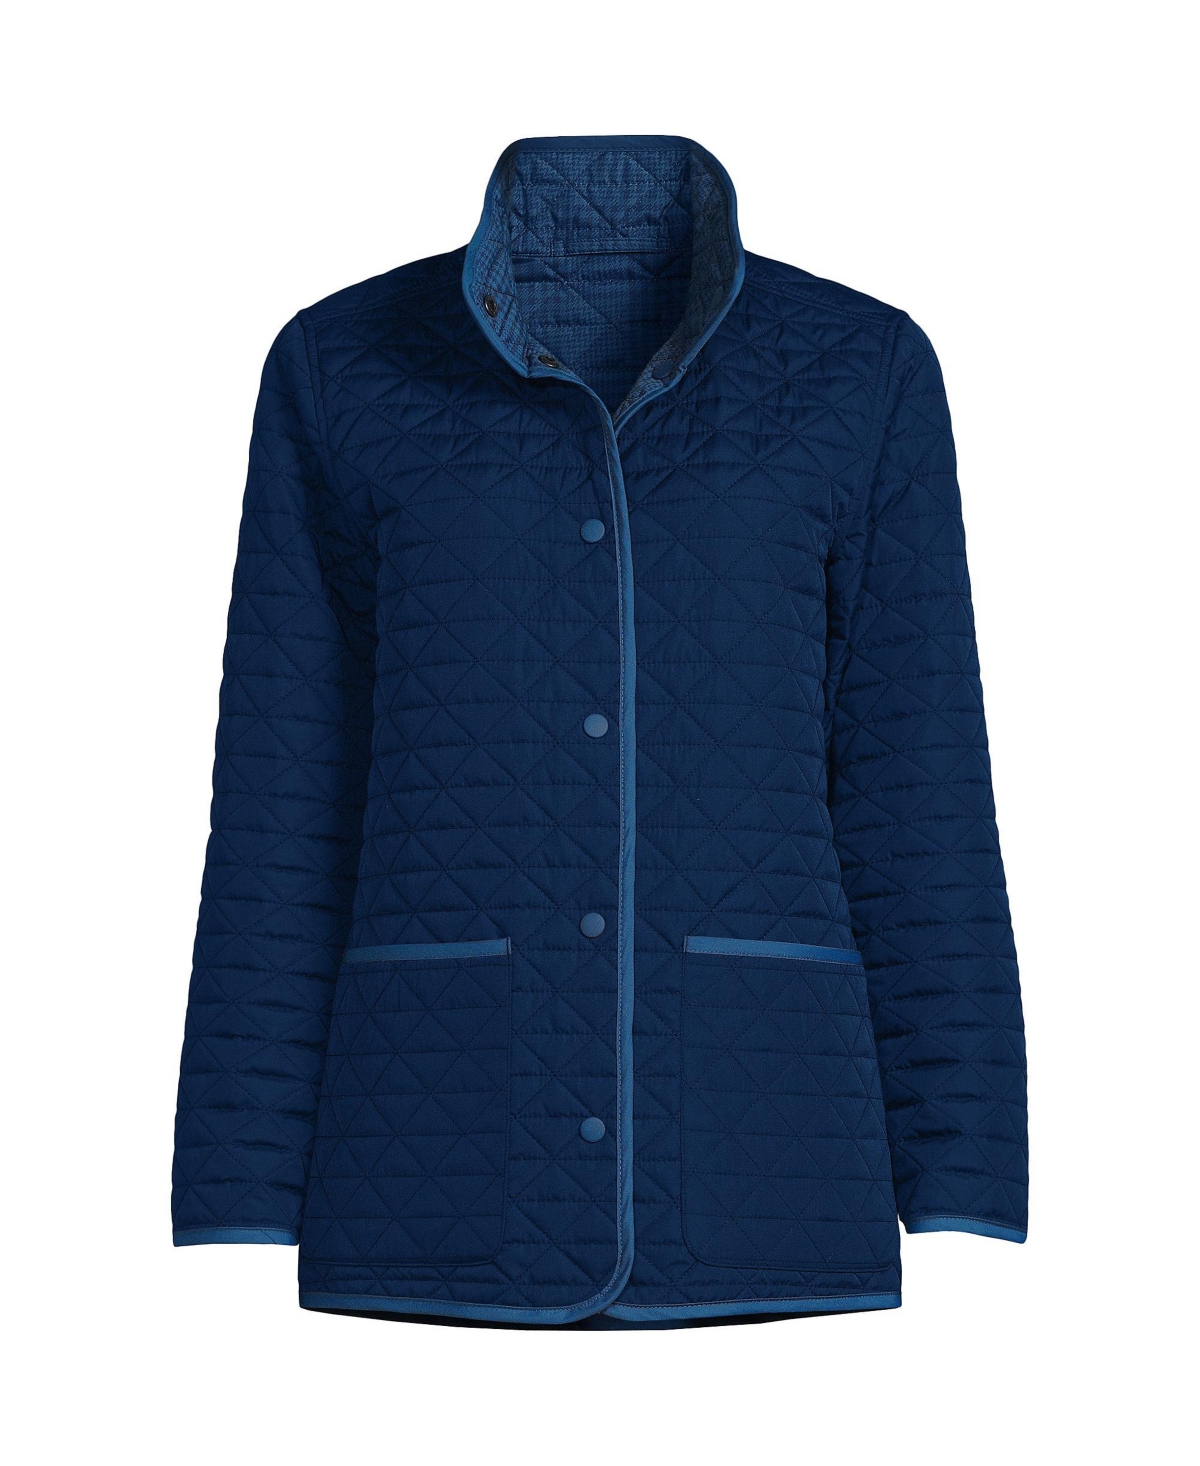 Plus Size Insulated Reversible Barn Jacket - Deep sea navy/blue check